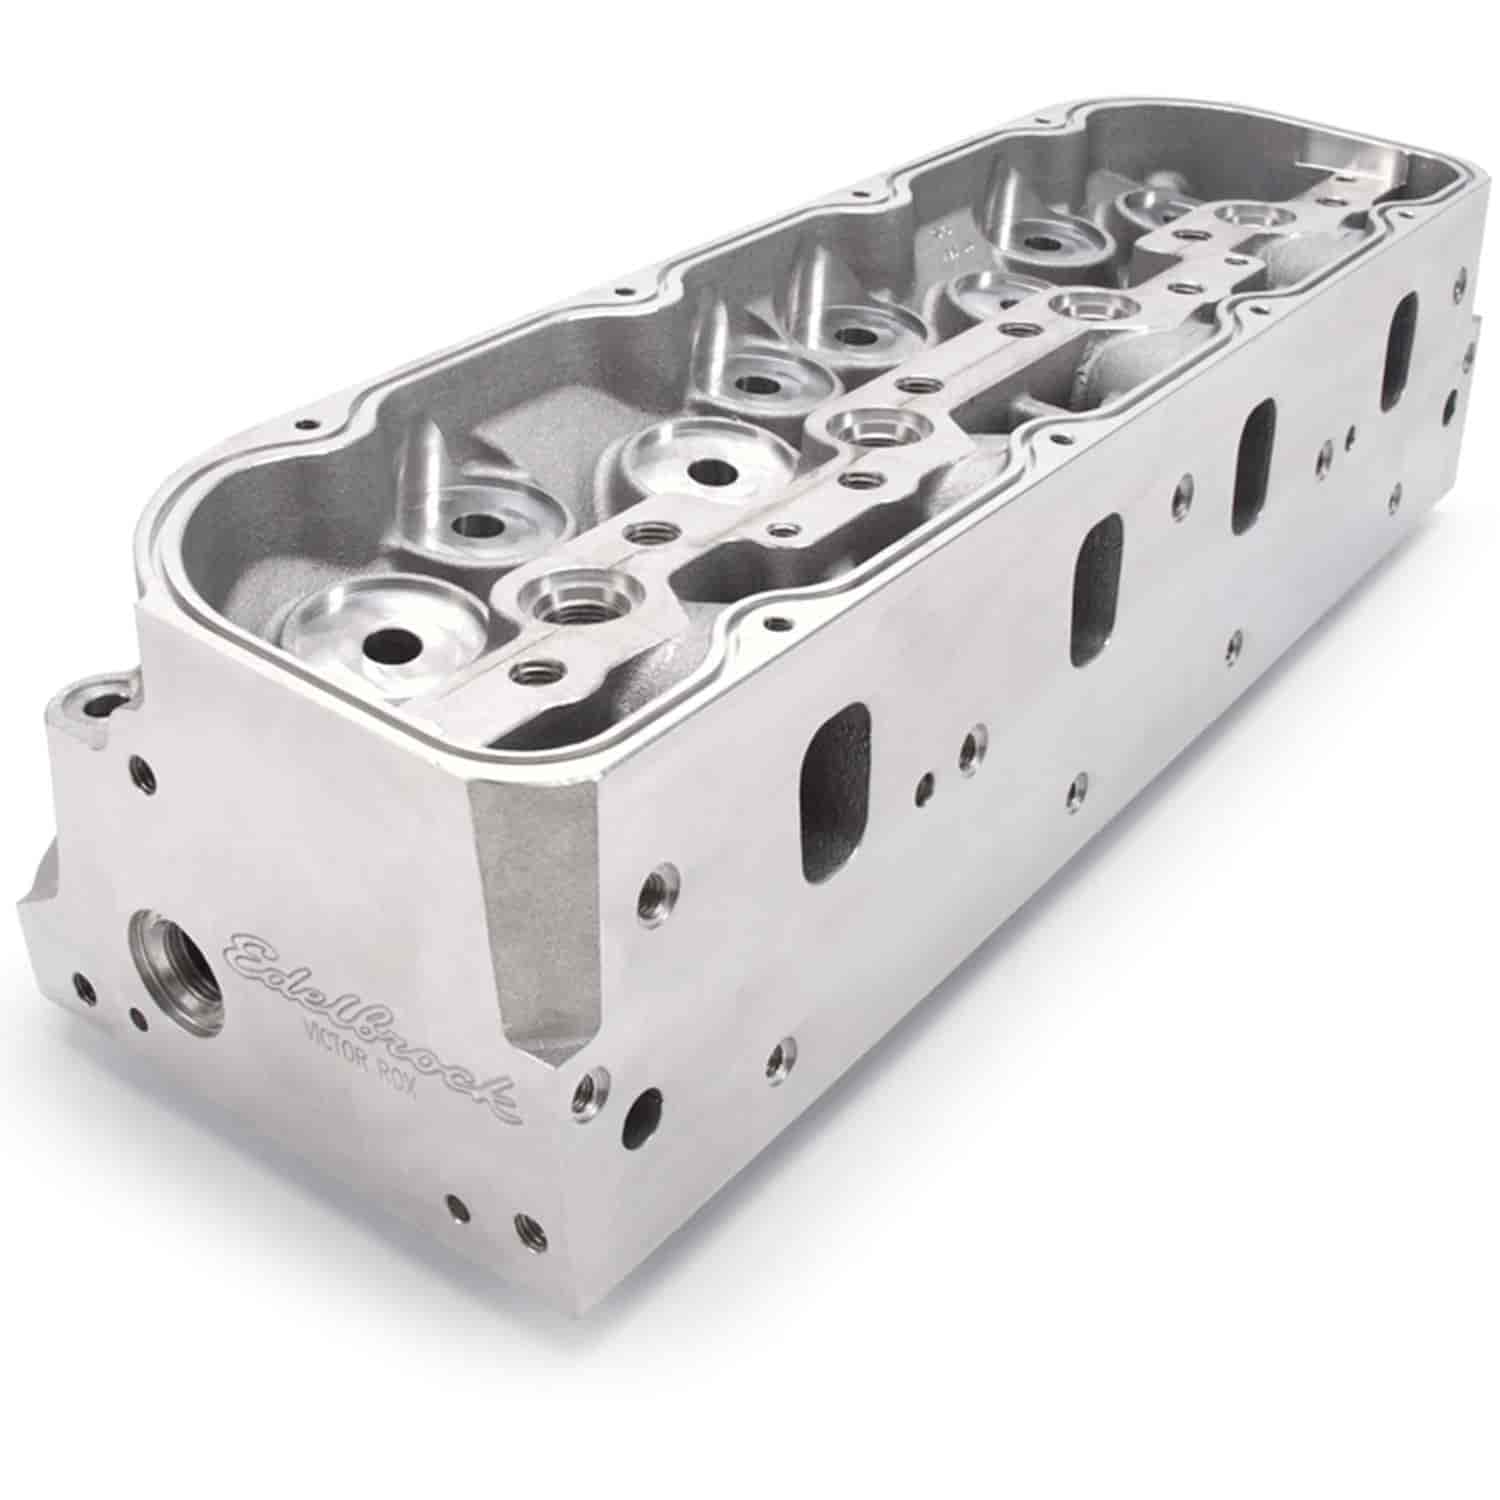 Pro-Port Raw Victor ROX Cylinder Head for Small Block Chevy